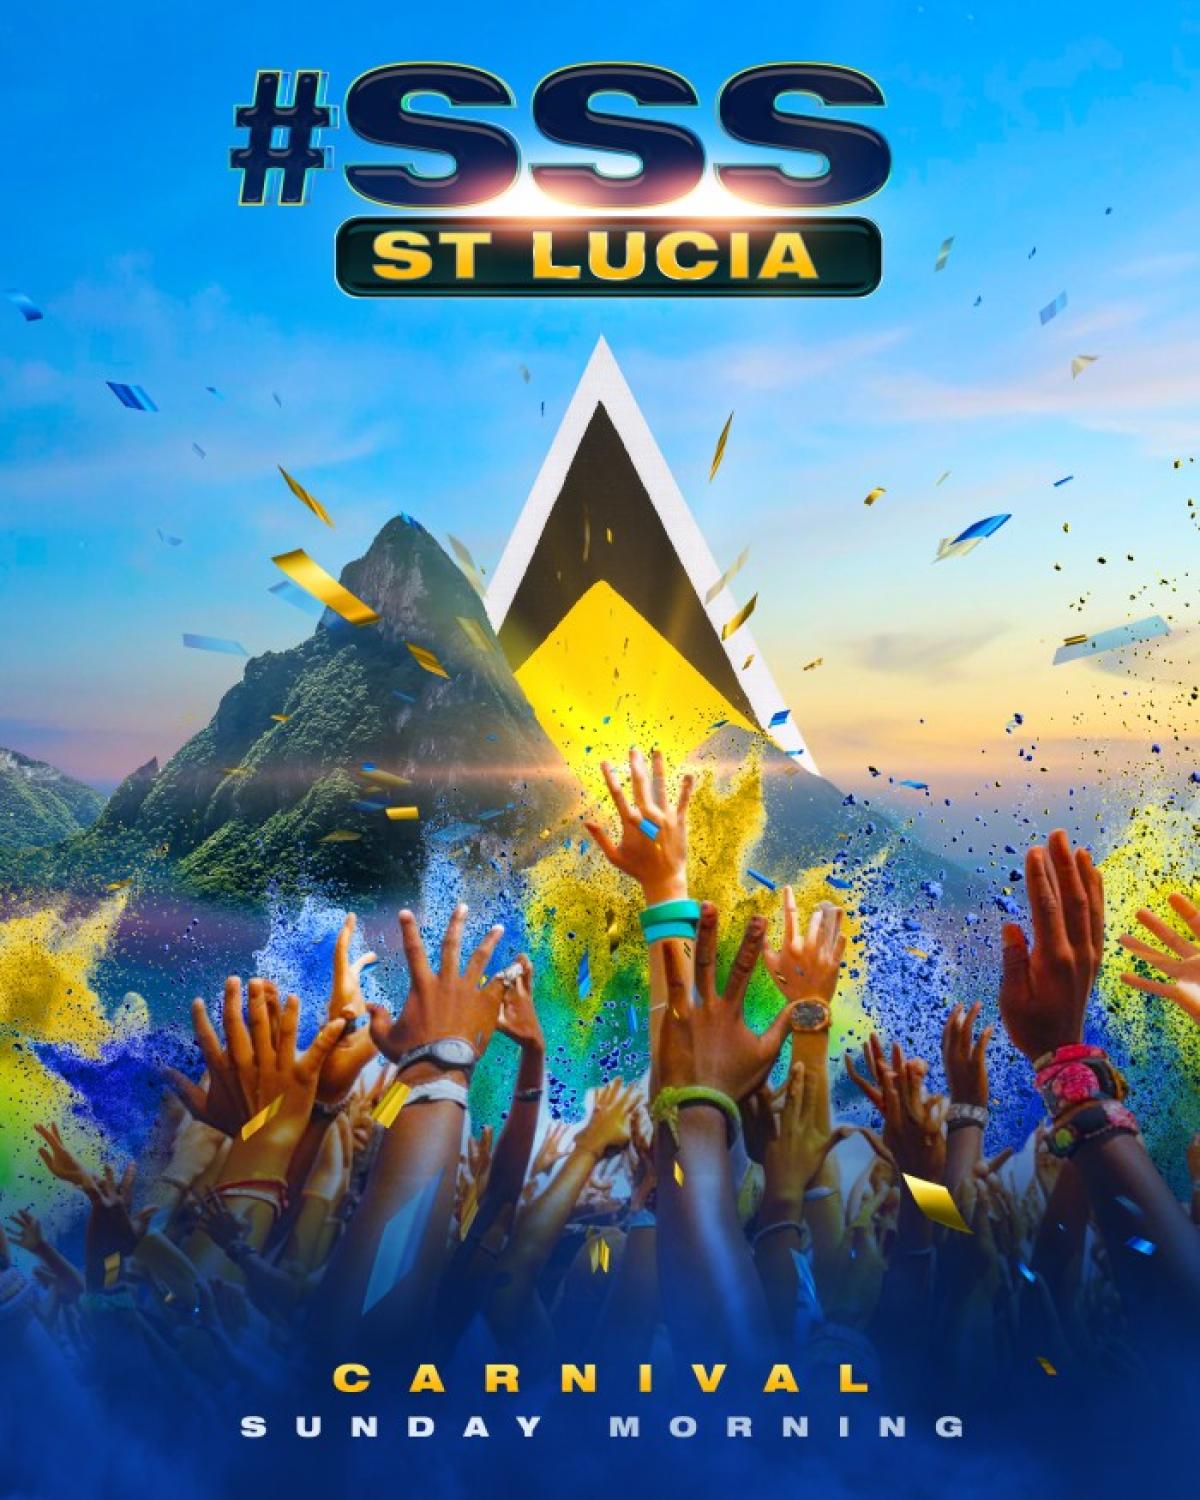 #SSS St.Lucia Cooler Jouvert flyer or graphic.